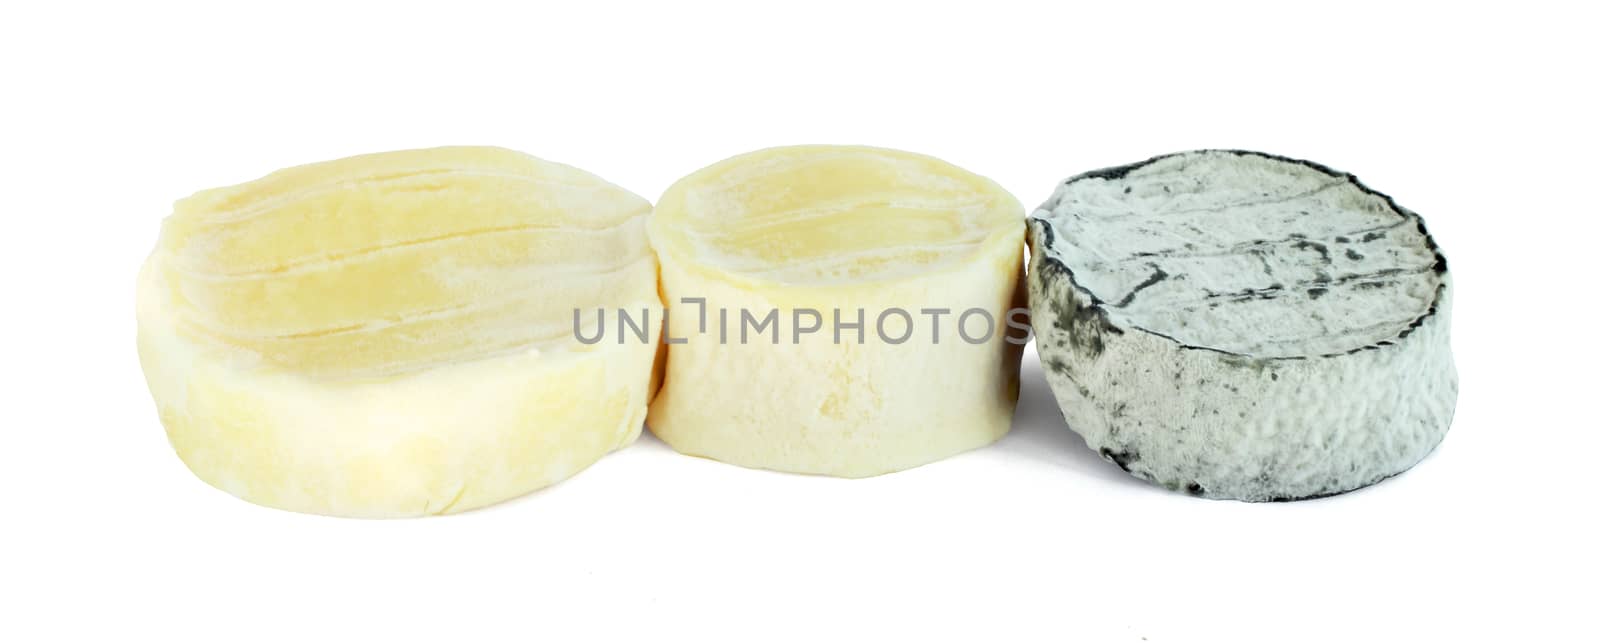 Three portions of soft round goat cheese isolated on white background